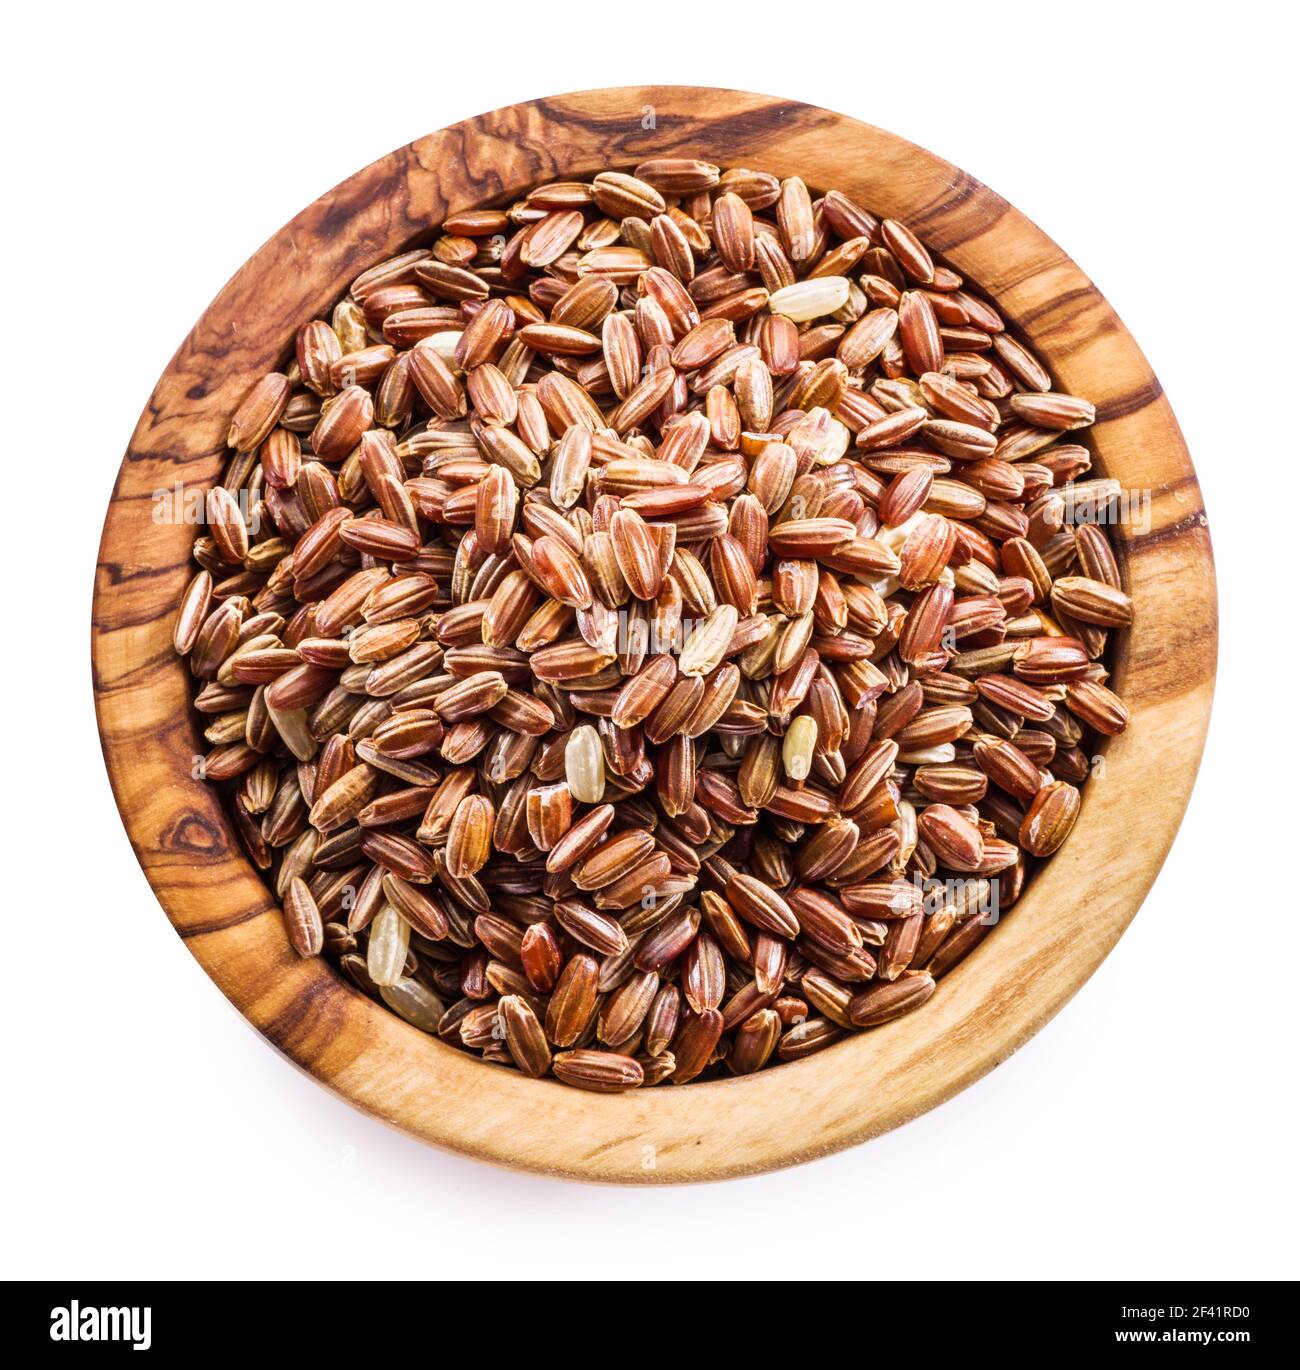 Brown rice - whole grain rice with outer hull or husk in wooden bowl on white background. Top view. File contains clipping path. Stock Photo